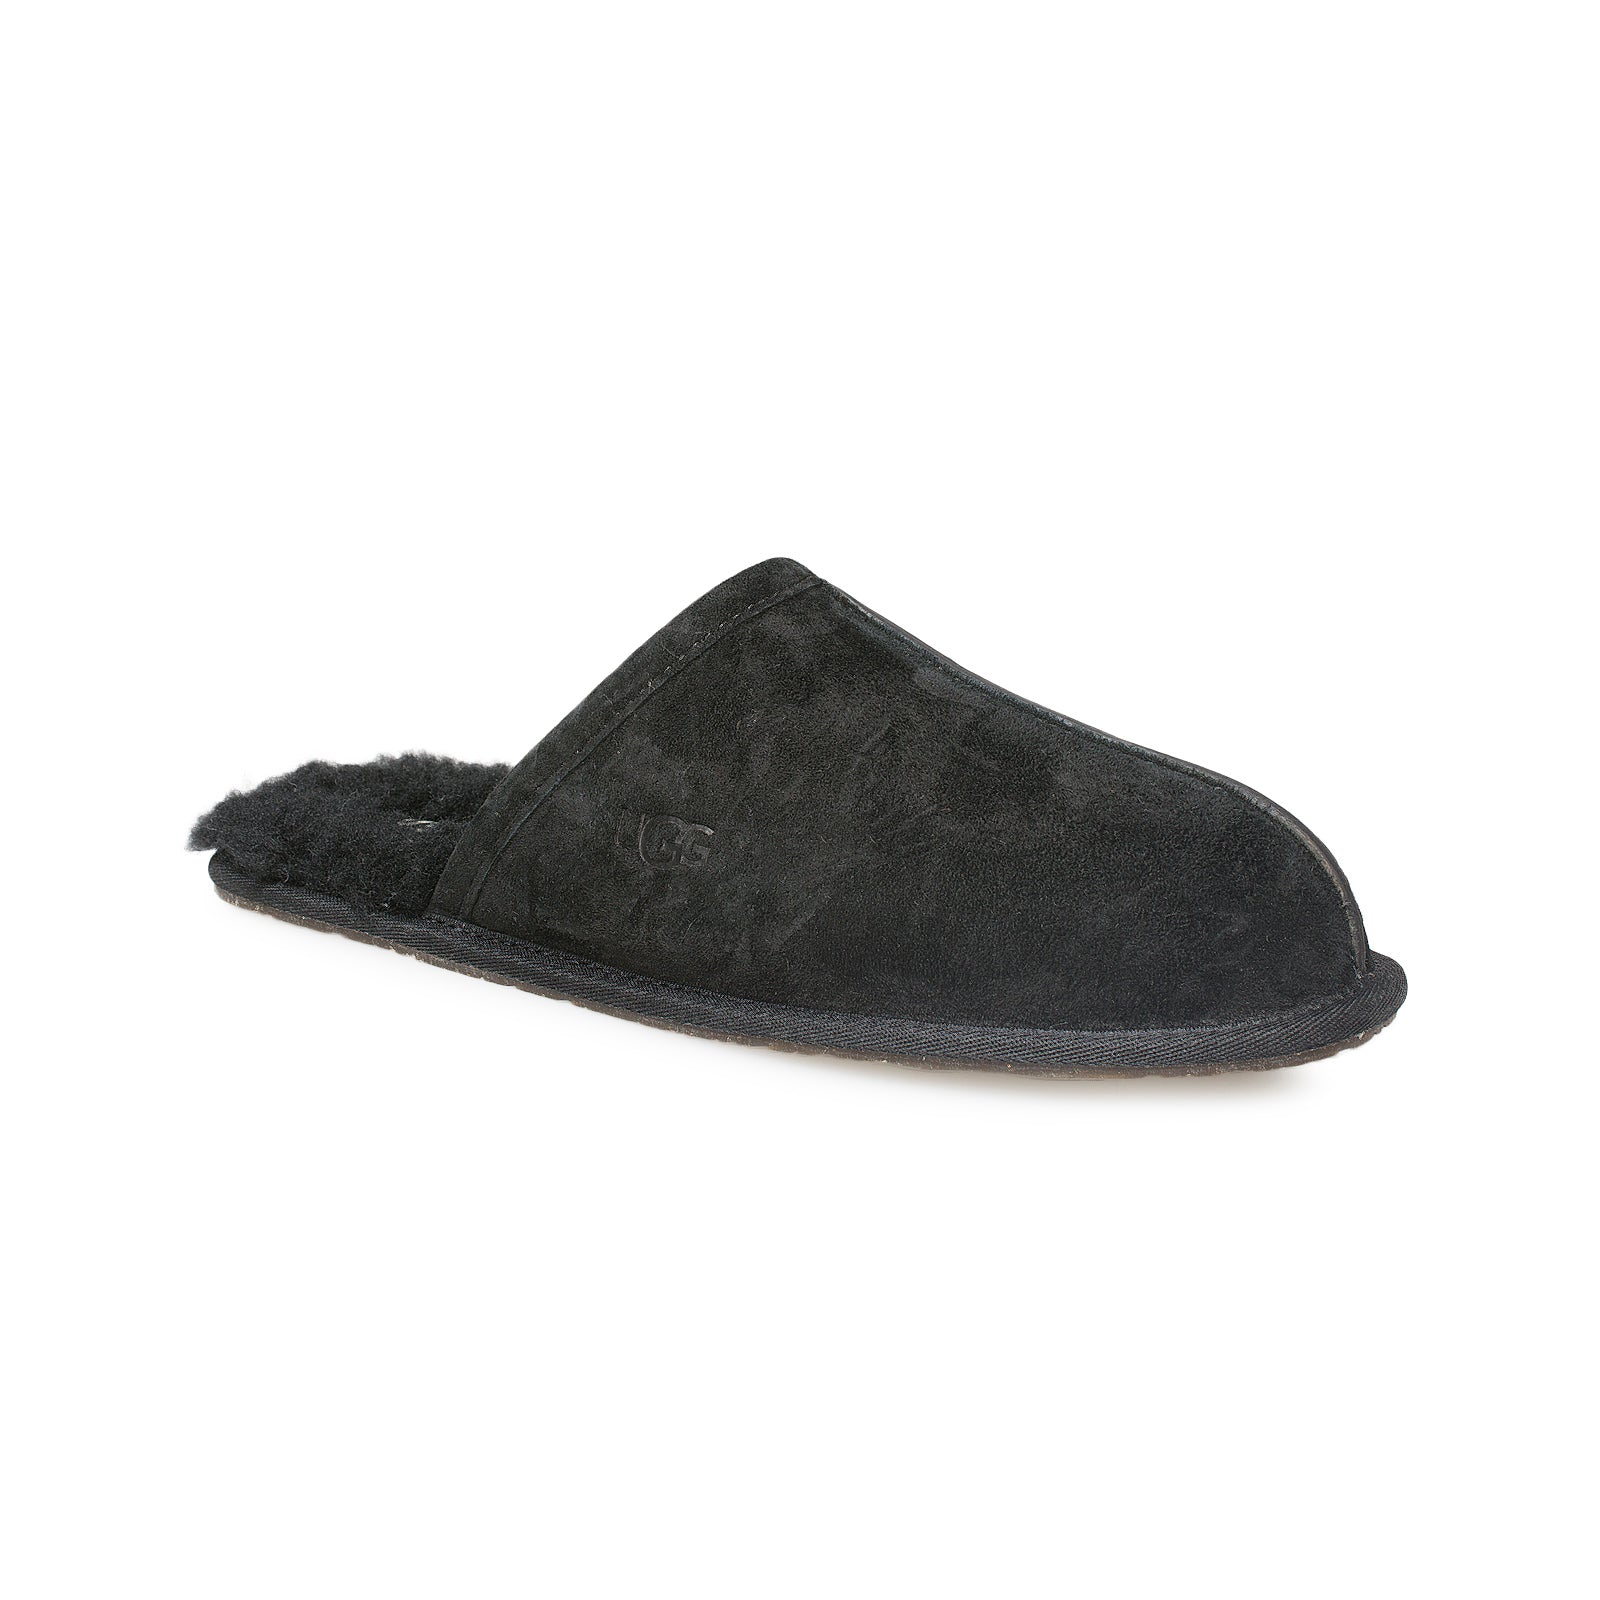 ugg pearle slippers